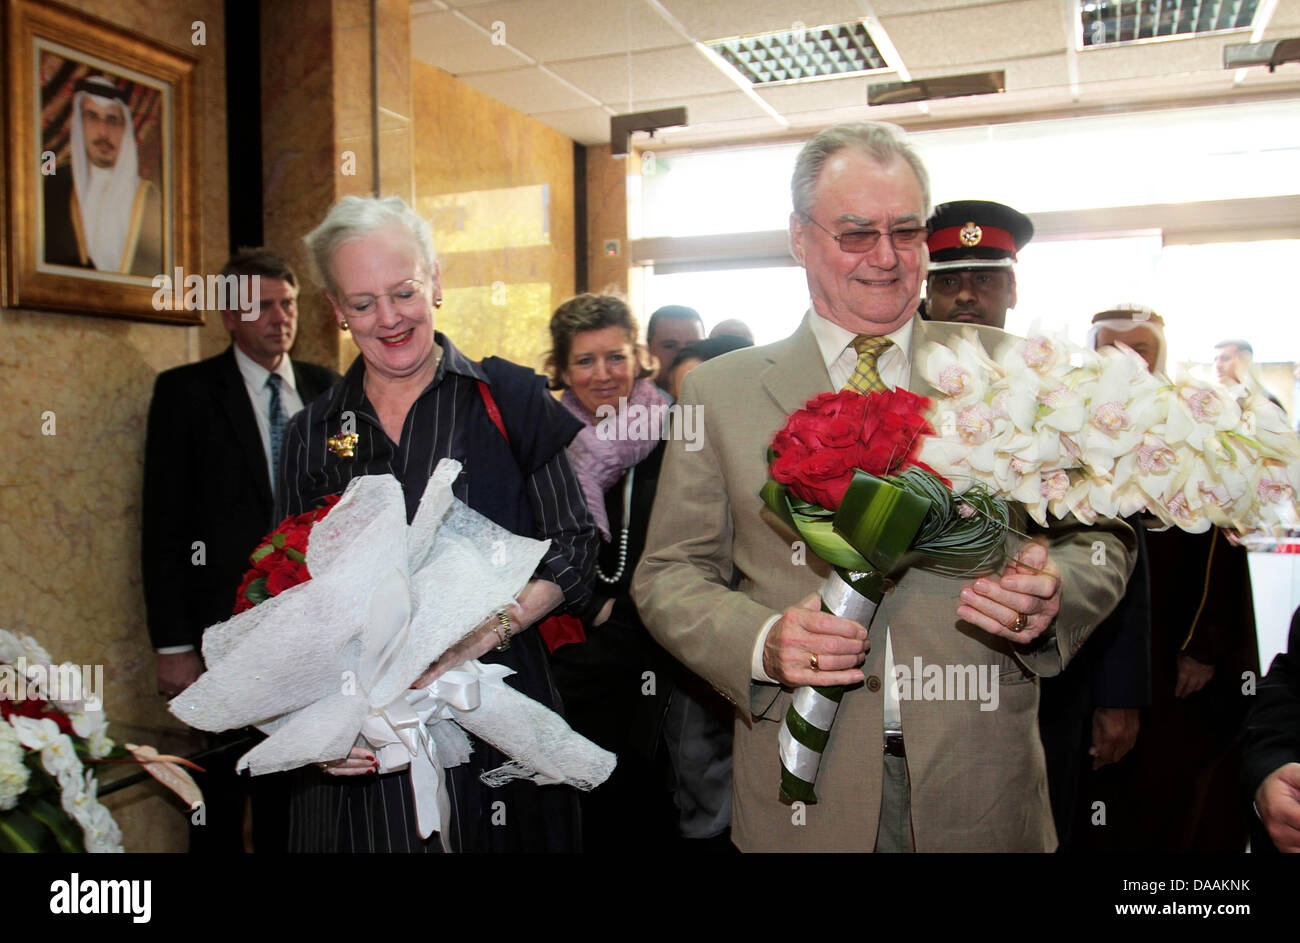 queen-margrethe-ii-of-denmark-and-prince-henrik-visit-the-gpic-gulf-DAAKNK.jpg